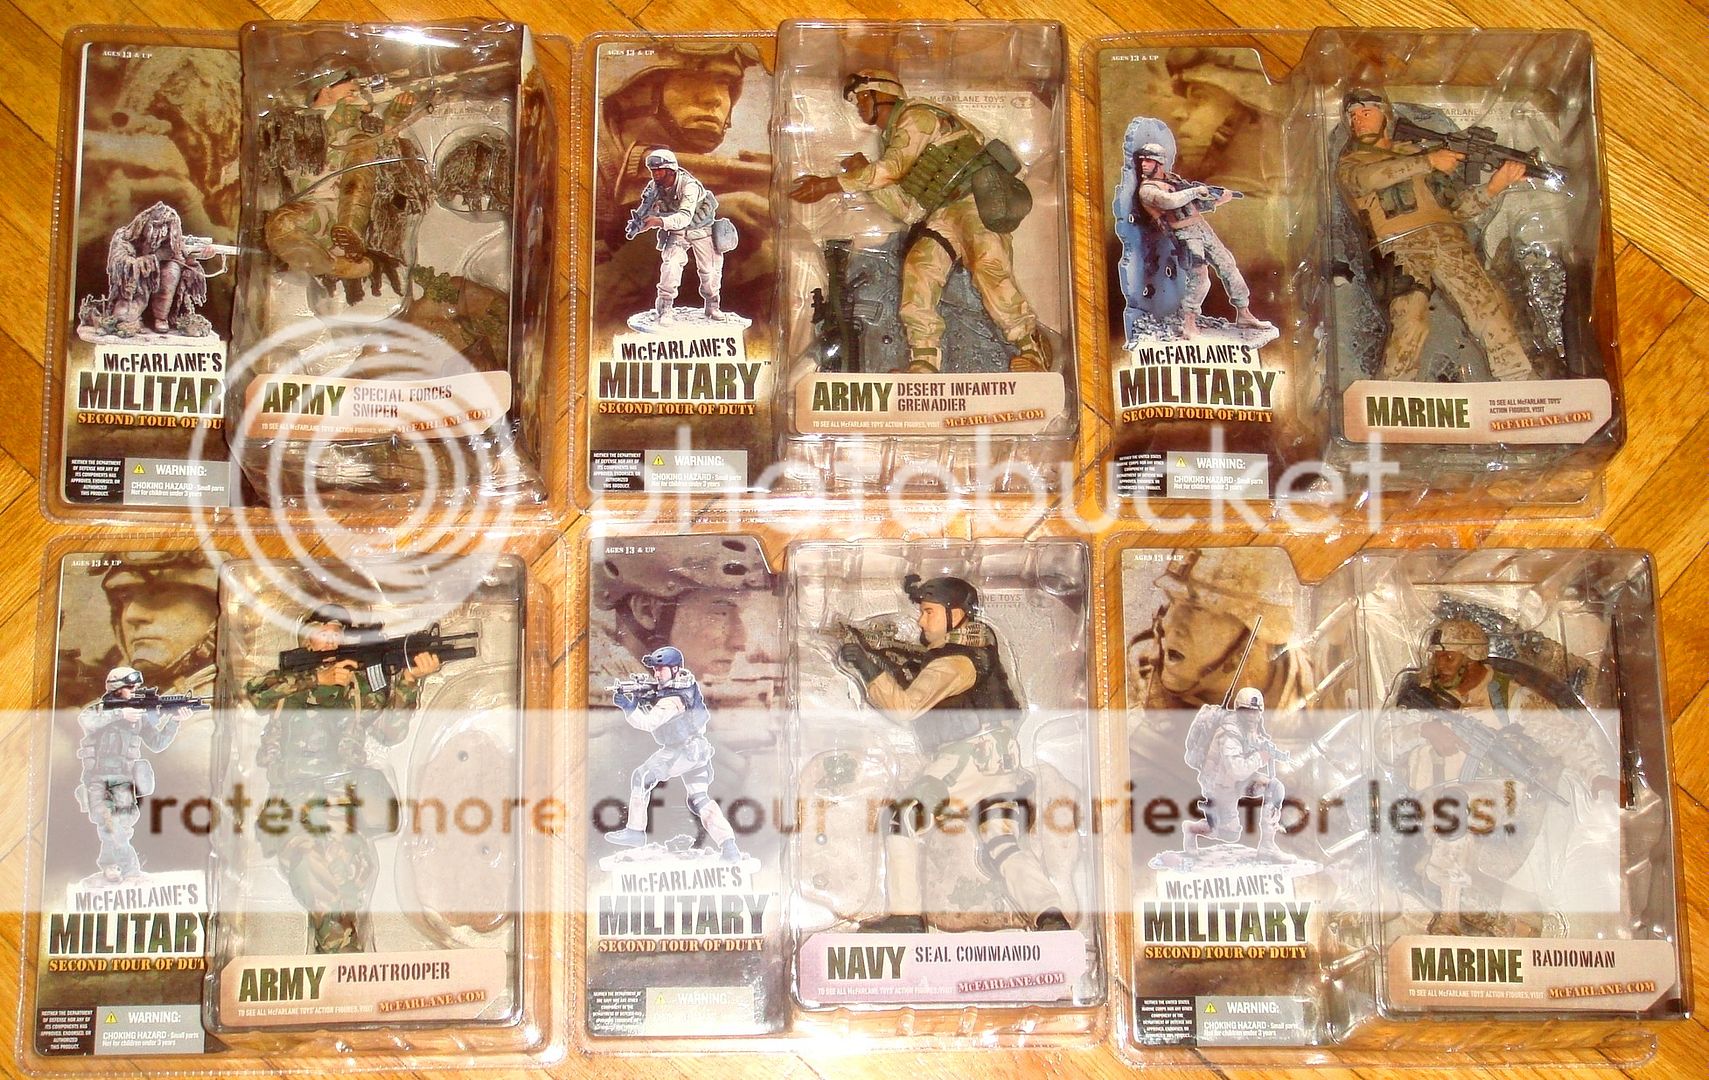 MCFARLANE MILITARY SECOND TOUR OF DUTY SNIPER ARMY SPECIAL FORCES MIB 